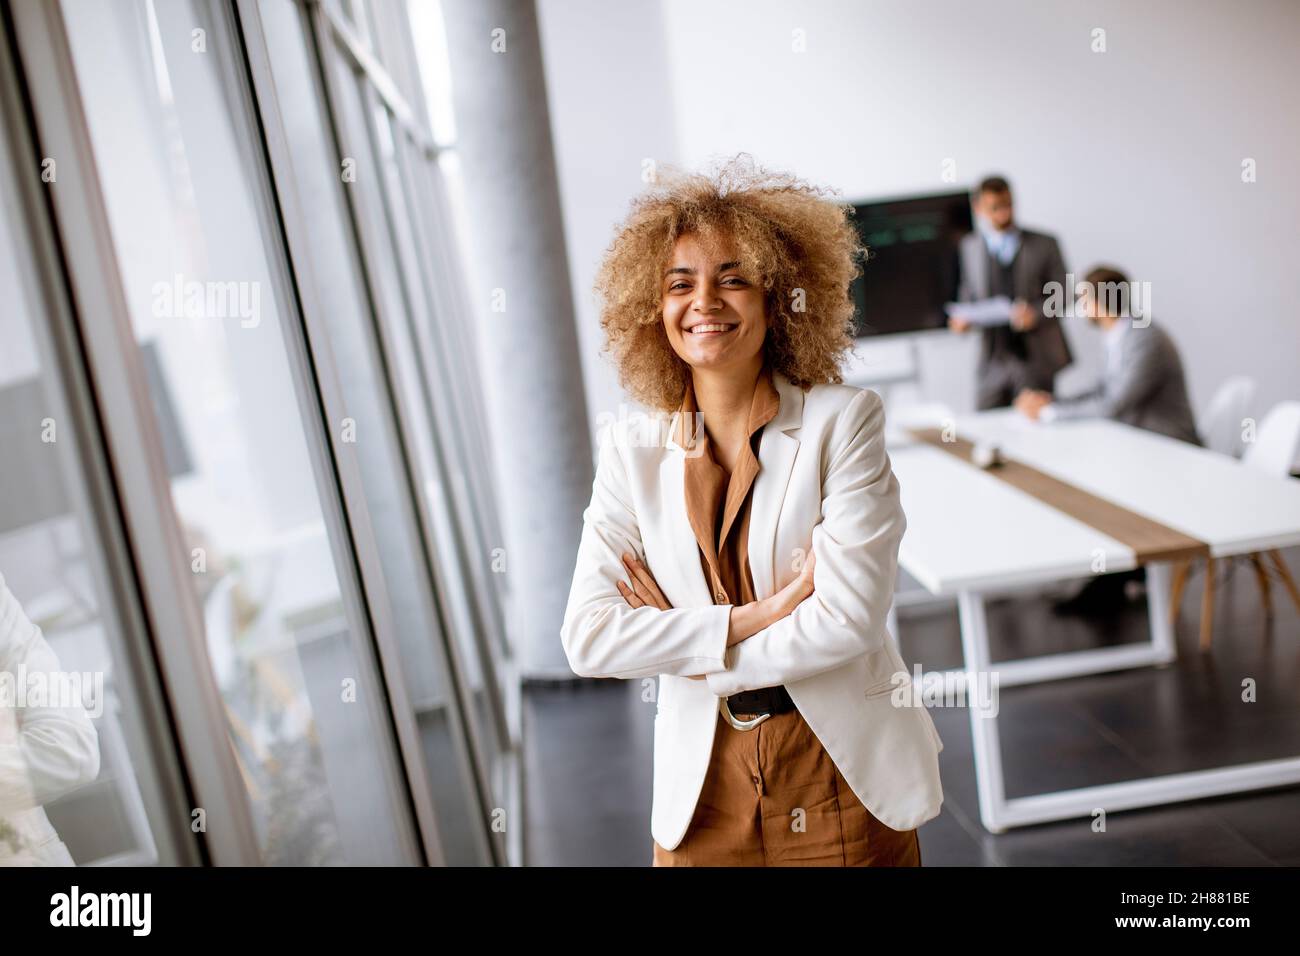 Young curly hair businesswoman standing in the office with young people works behind her Stock Photo